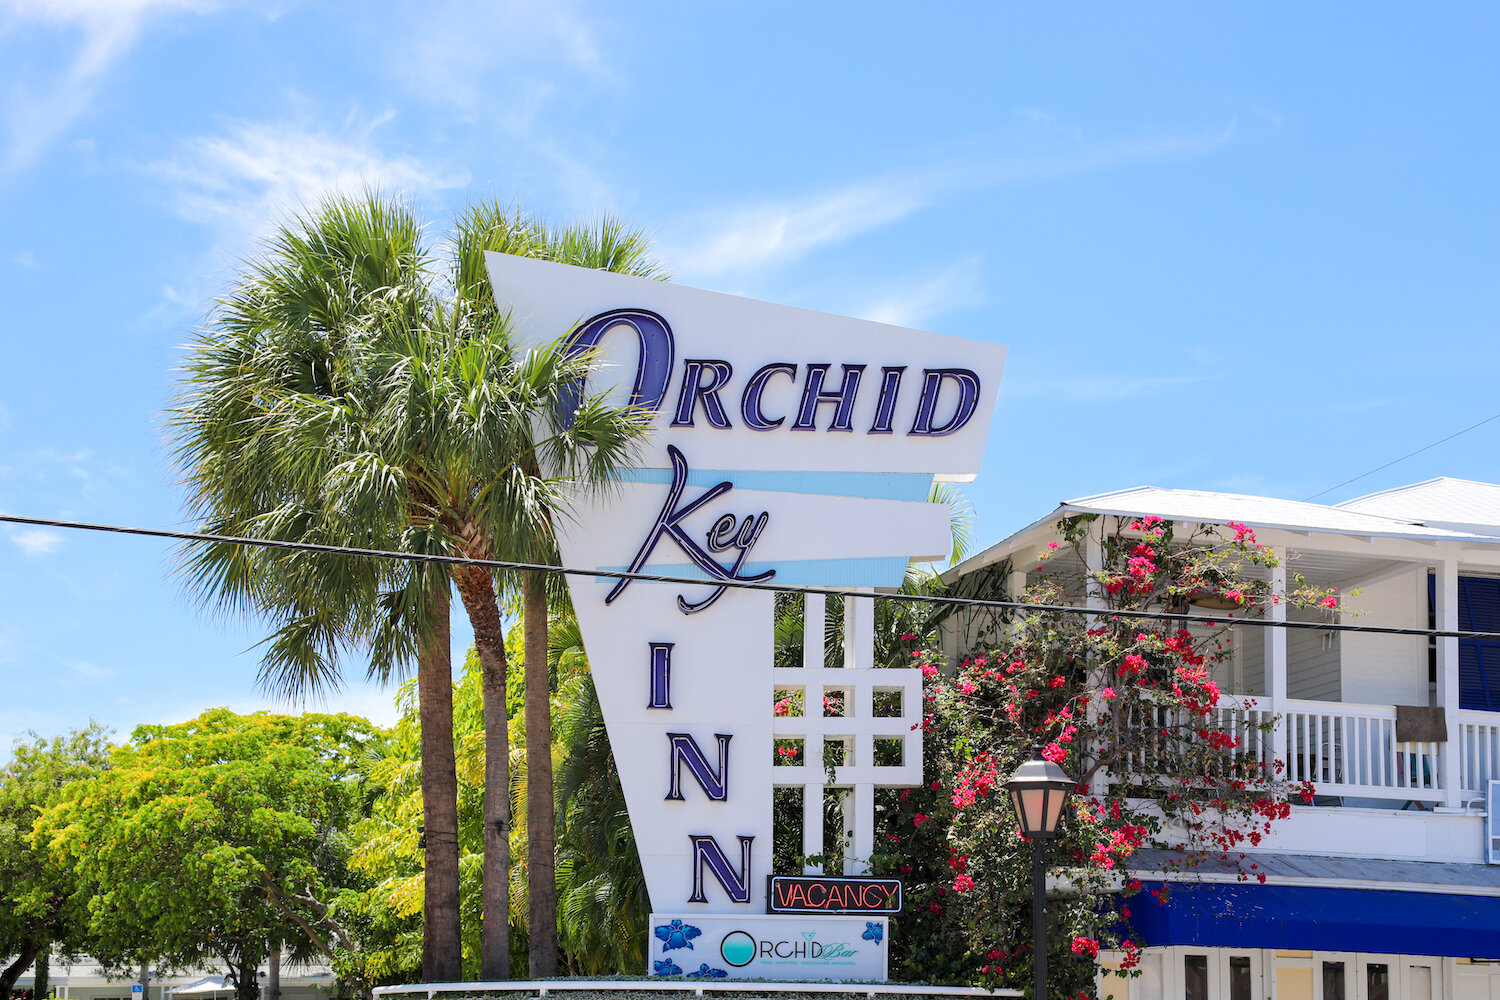 Location and Attractions — Orchid Key